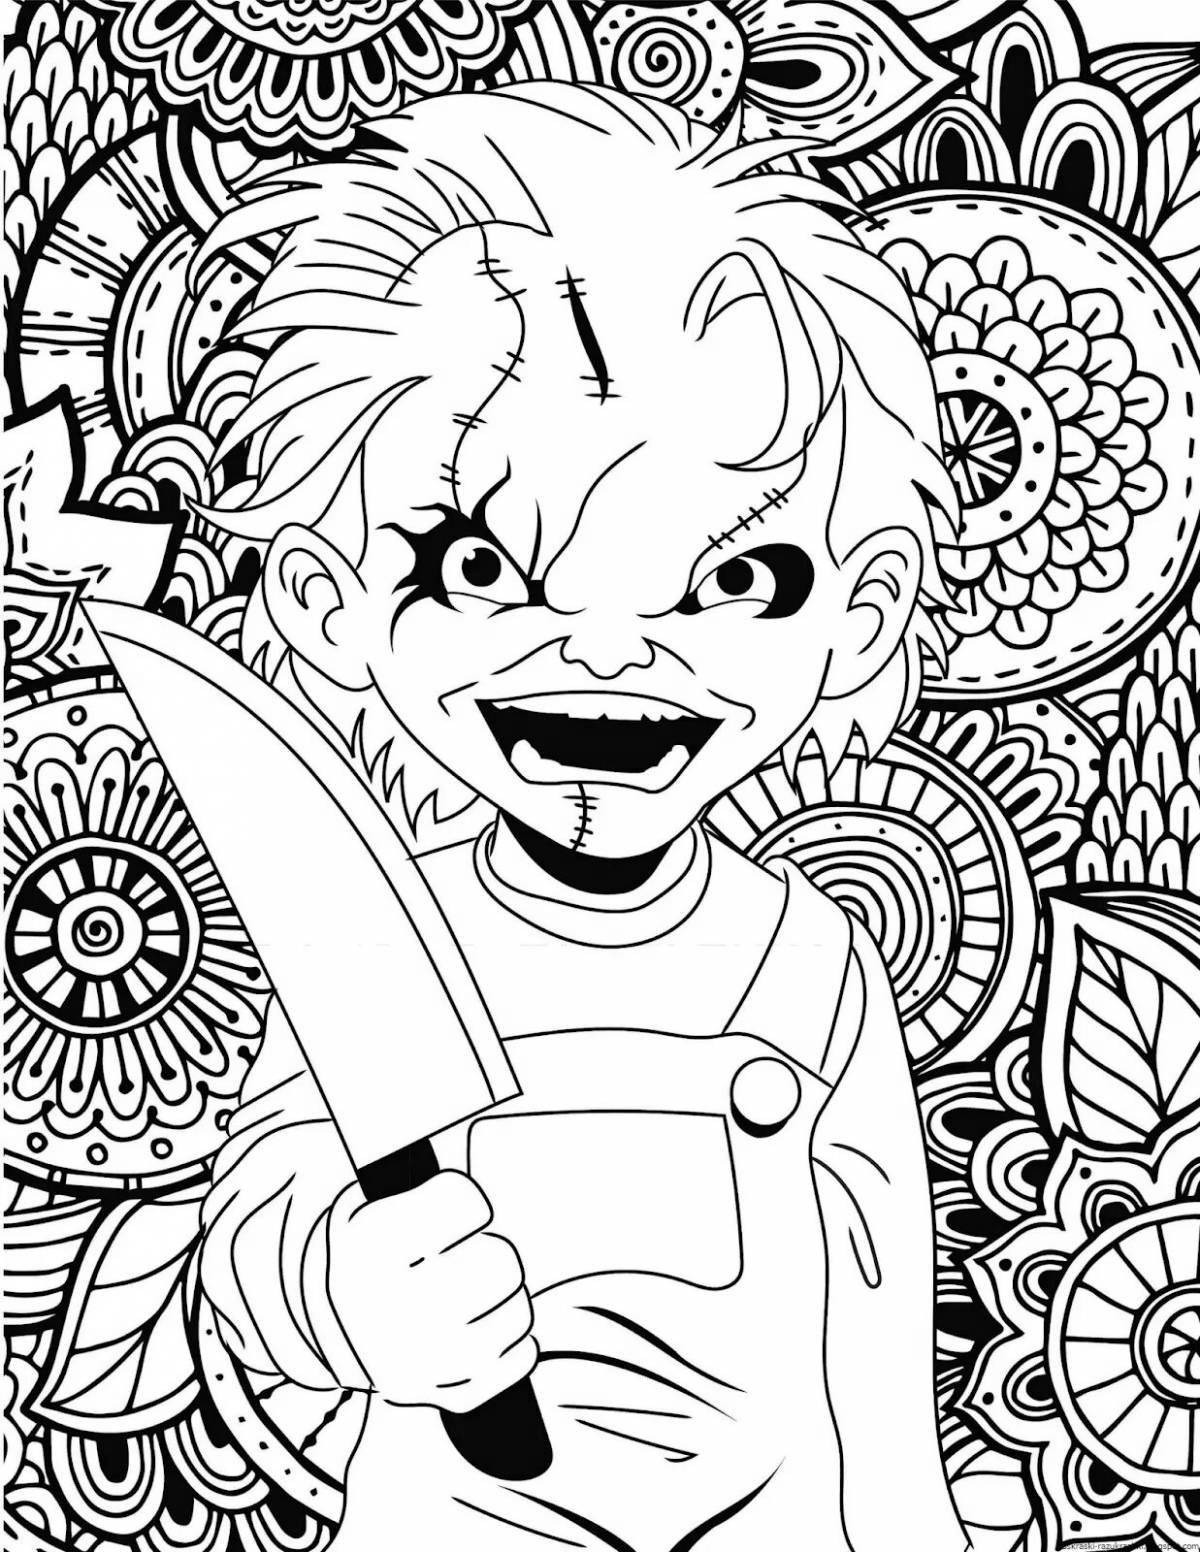 Nasty and repulsive horror coloring page